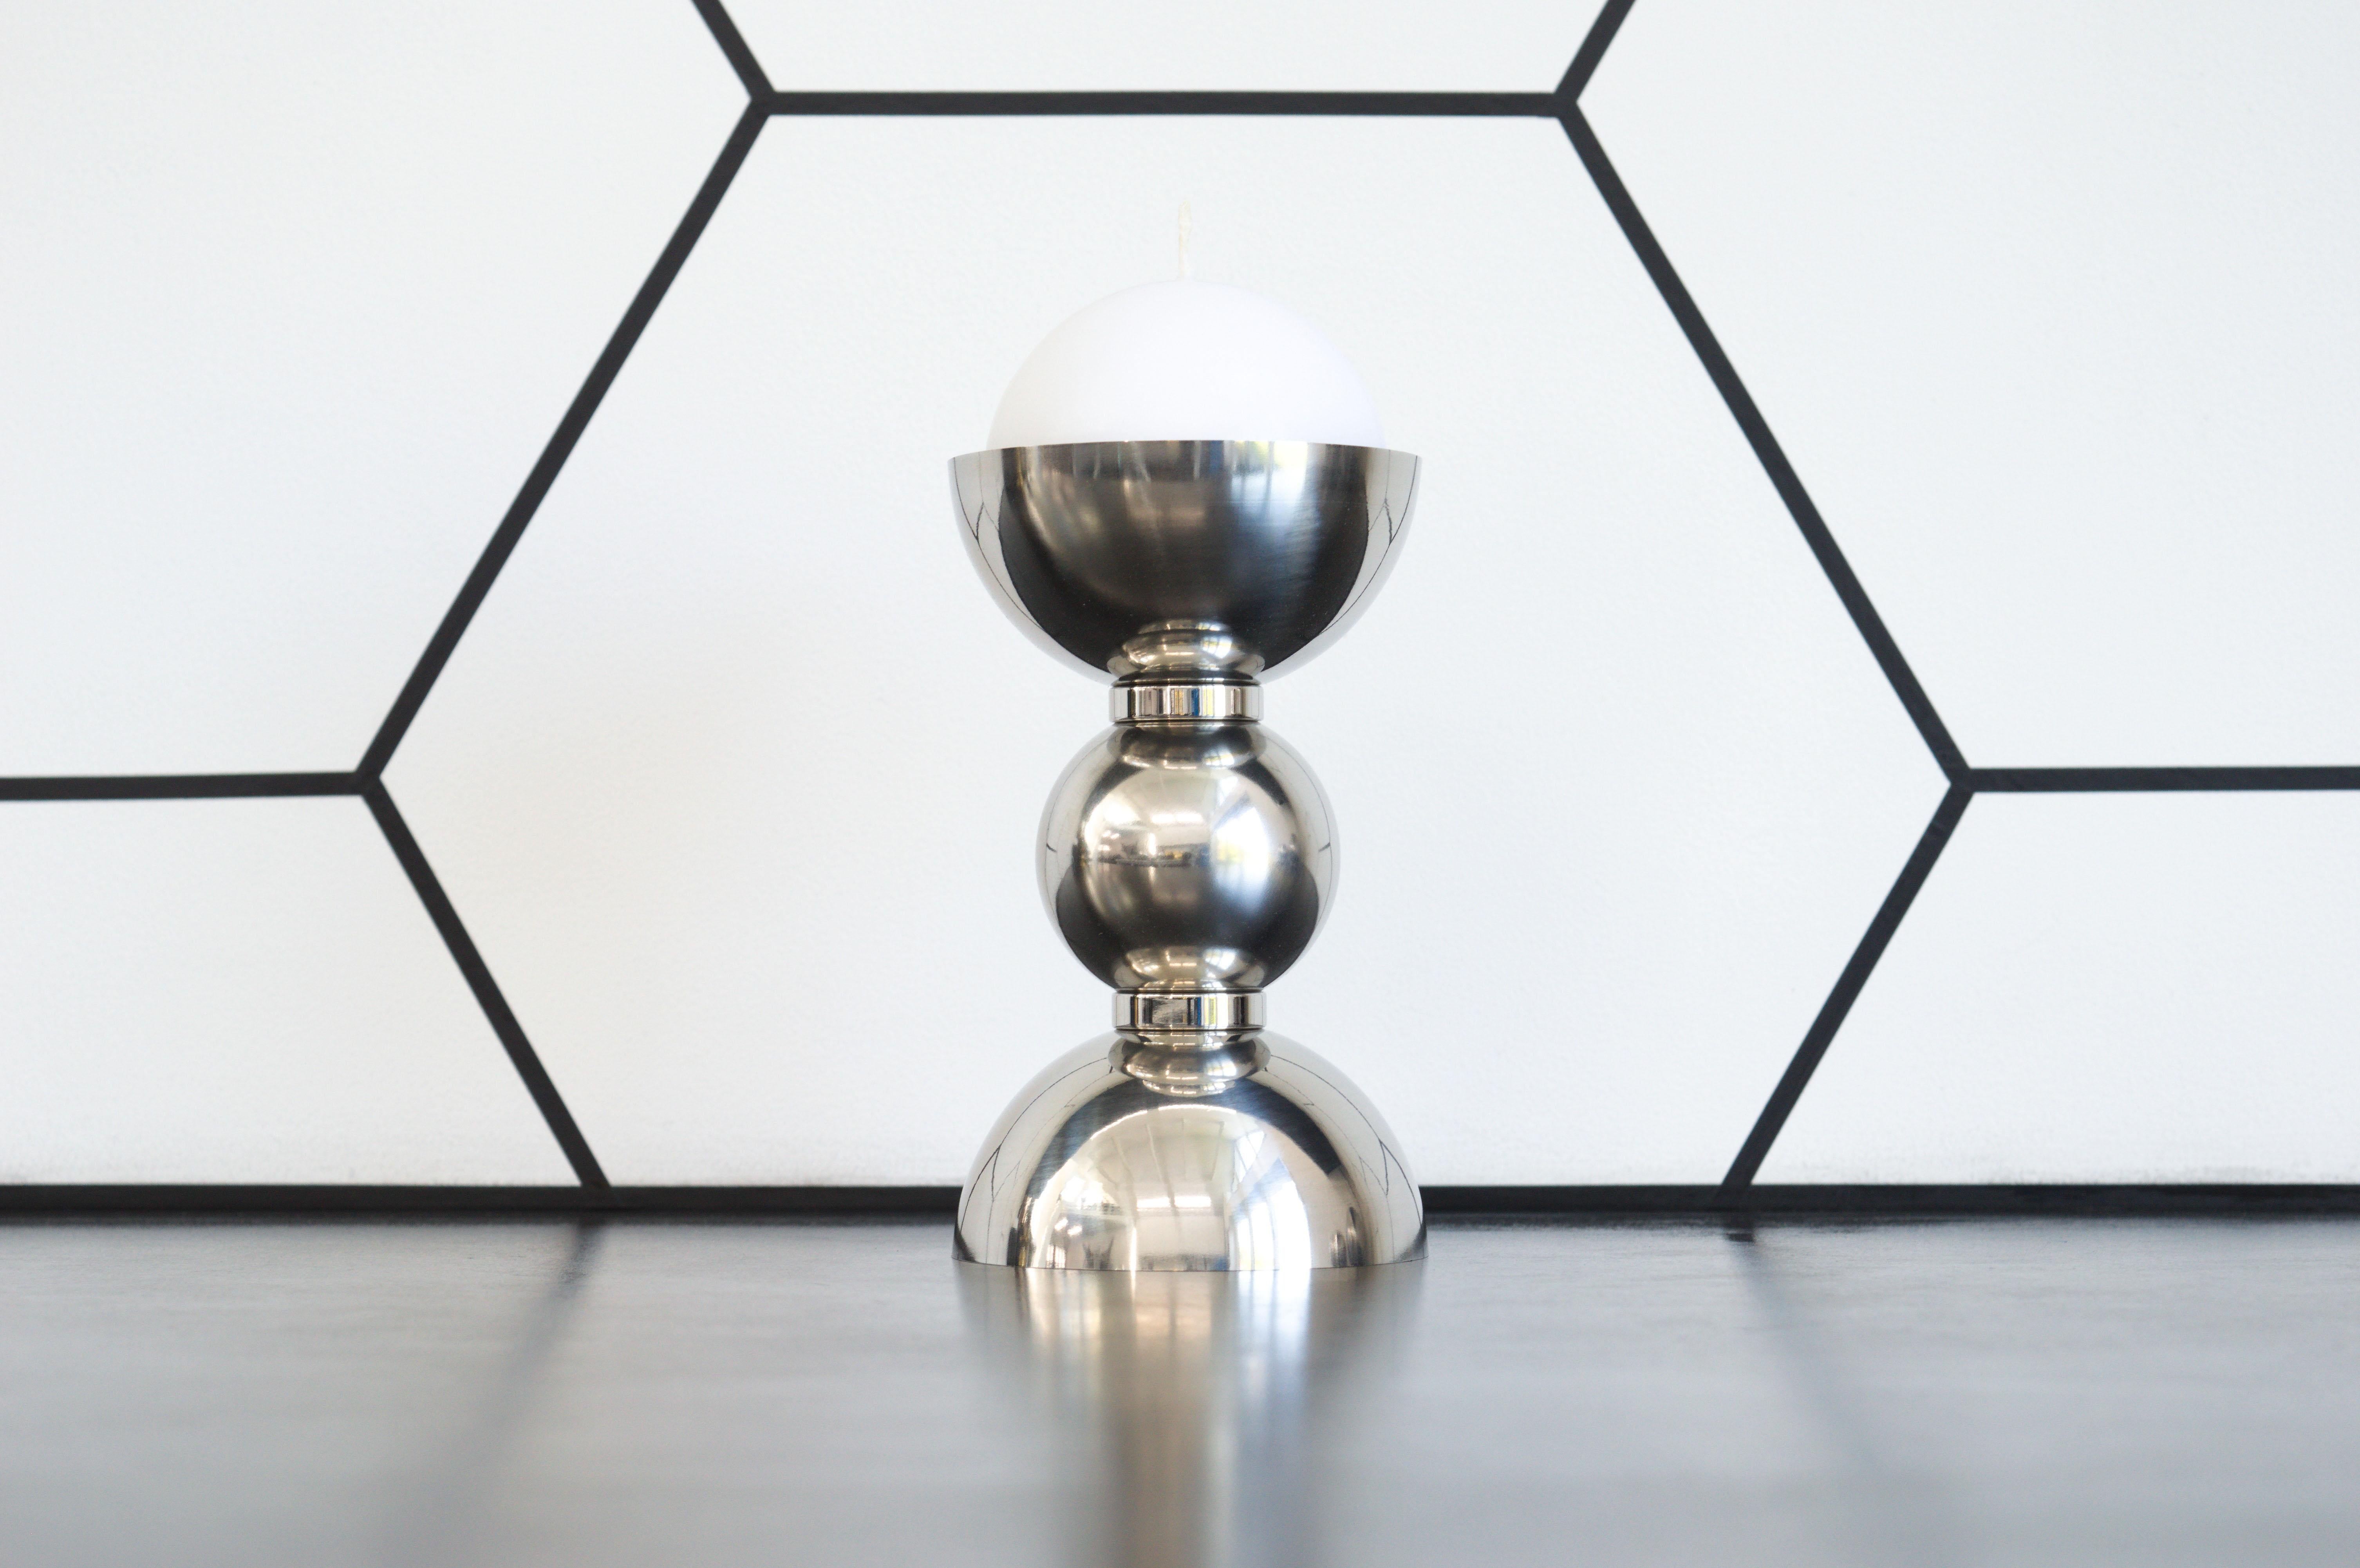 Contemporary candlestick created from polished stainless steel spheres and domes, sharing the form of the Artemis Table. The silver finish references SpaceX's stainless steel Starship design for transporting the Artemis astronauts to the Moon.

The